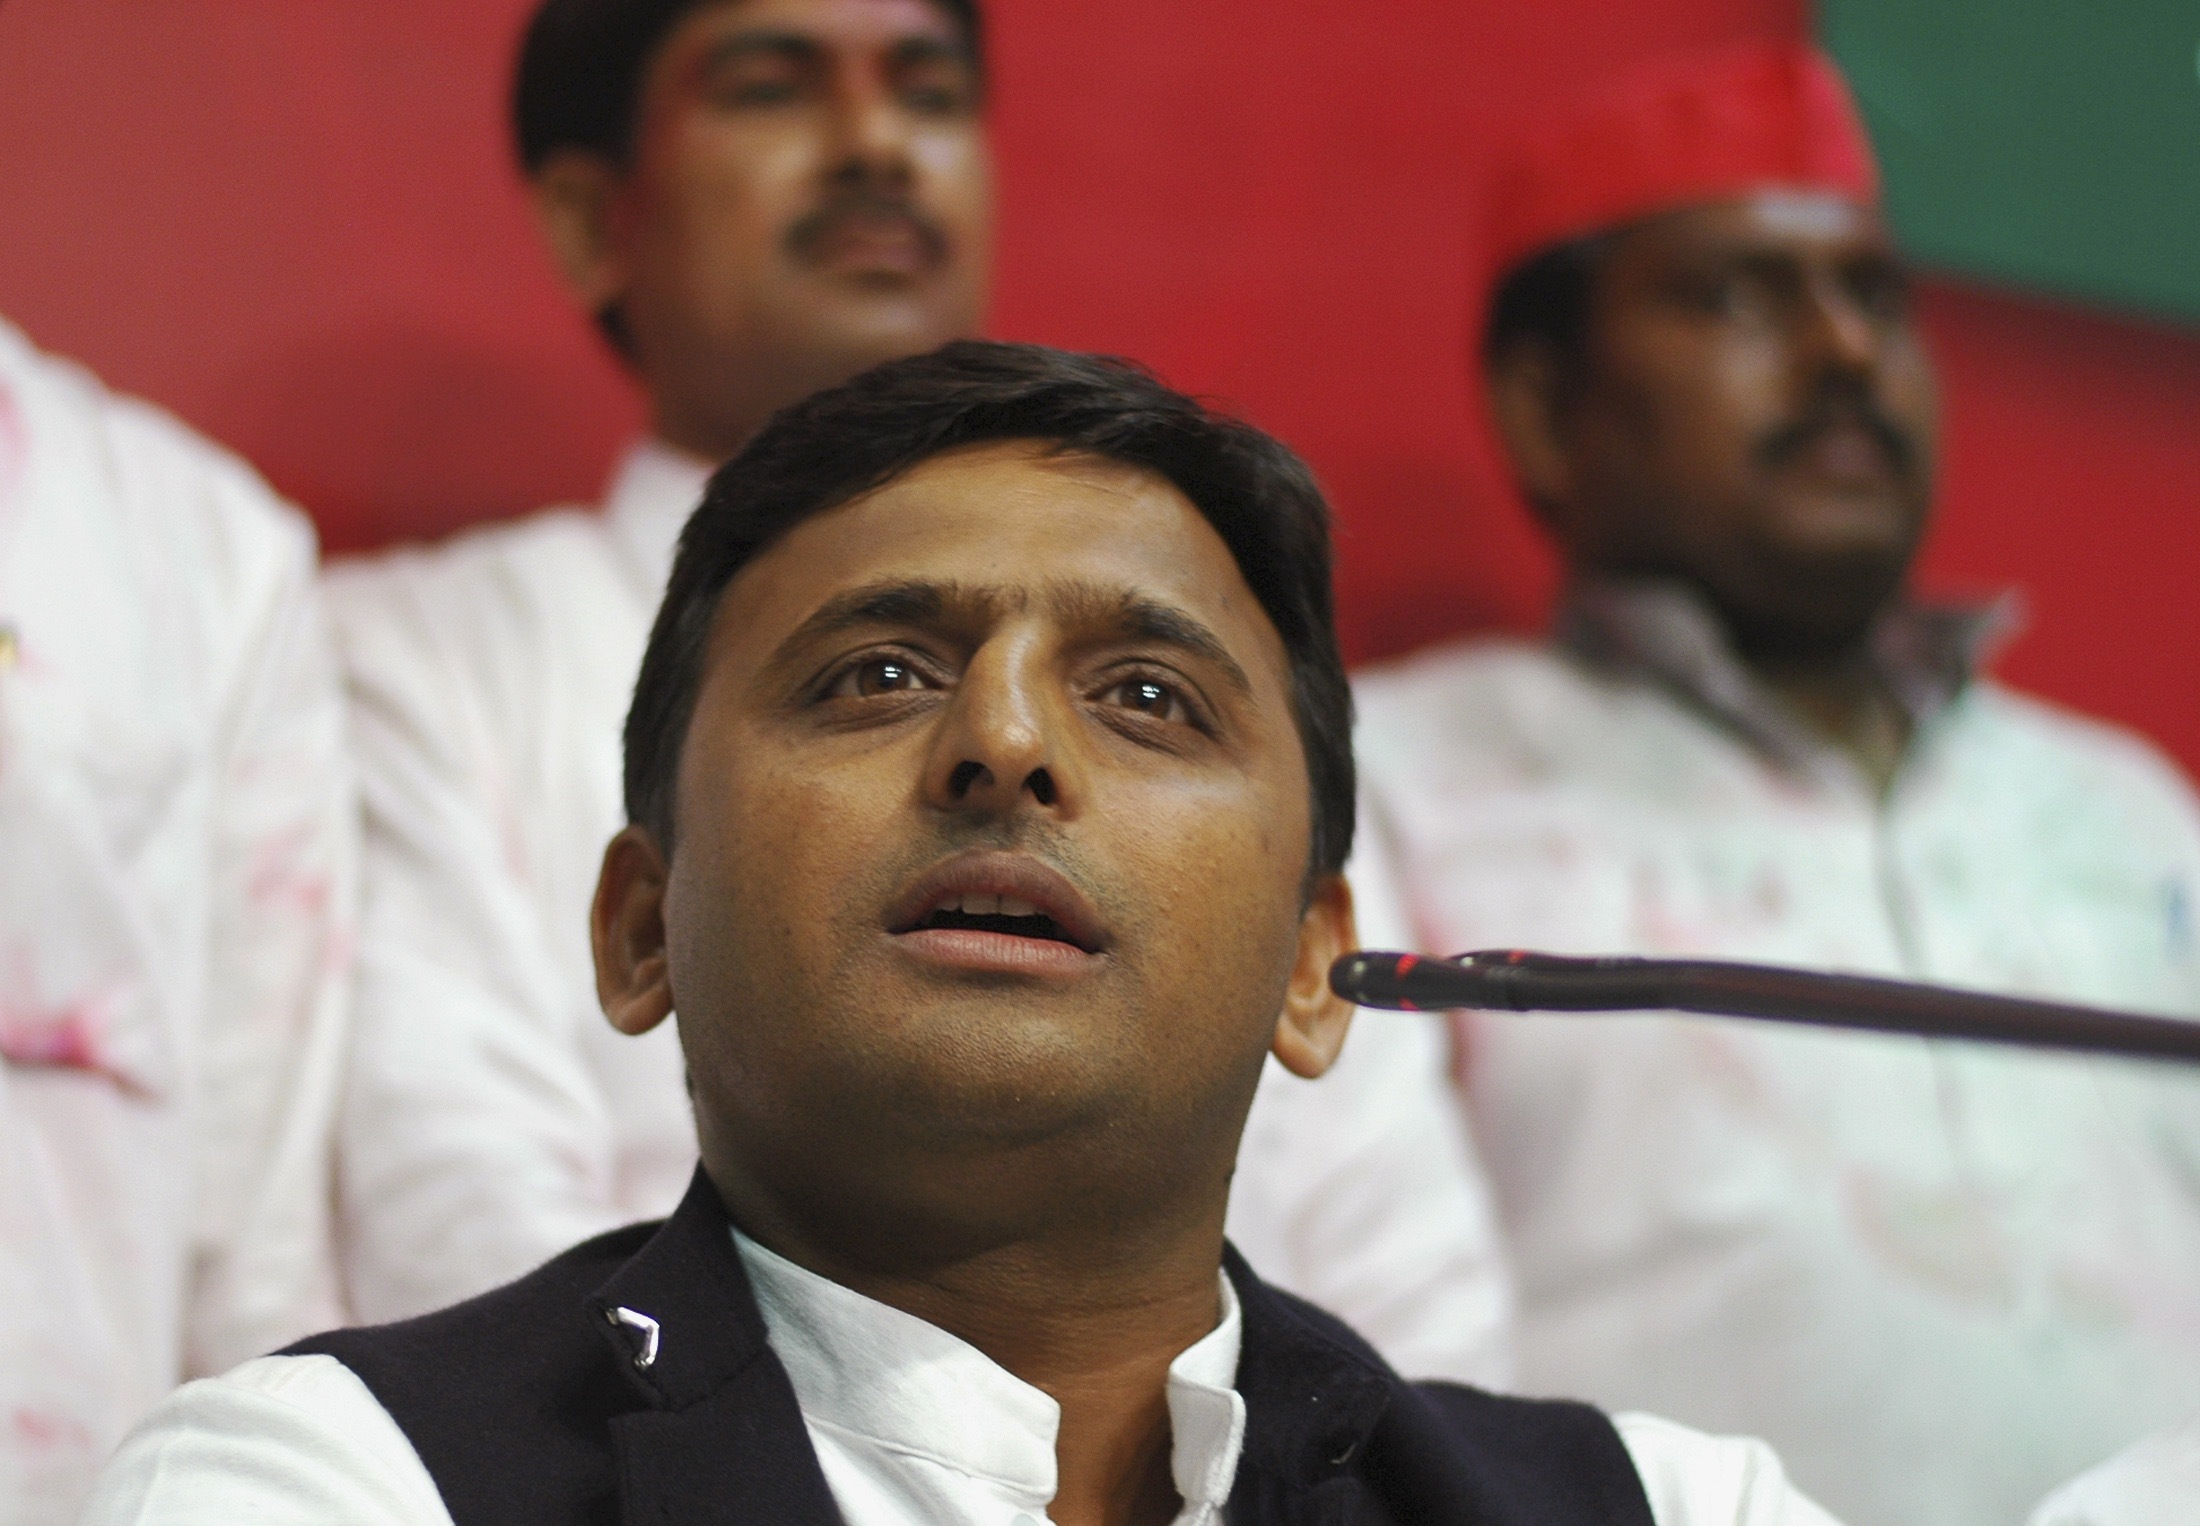 Akhilesh Yadav, state party president and son of the Samajwadi Party President Mulayam Singh Yadav, speaks during a news conference at their party headquarters in the northern Indian city of Lucknow March 6, 2012. India's Congress party trailed in fourth place as vote counting neared its end in Uttar Pradesh on Tuesday, a bitter election blow to Rahul Gandhi who had staked his political future on reviving his party's fortunes in the populous northern state. The runaway winner was the socialist Samajwadi Party, which means former wrestler Mulayam Singh Yadav will become chief minister for a fourth term since 1989, ousting the flamboyant lower-caste leader Mayawati. REUTERS/Stringer (INDIA - Tags: POLITICS ELECTIONS) - RTR2YX69